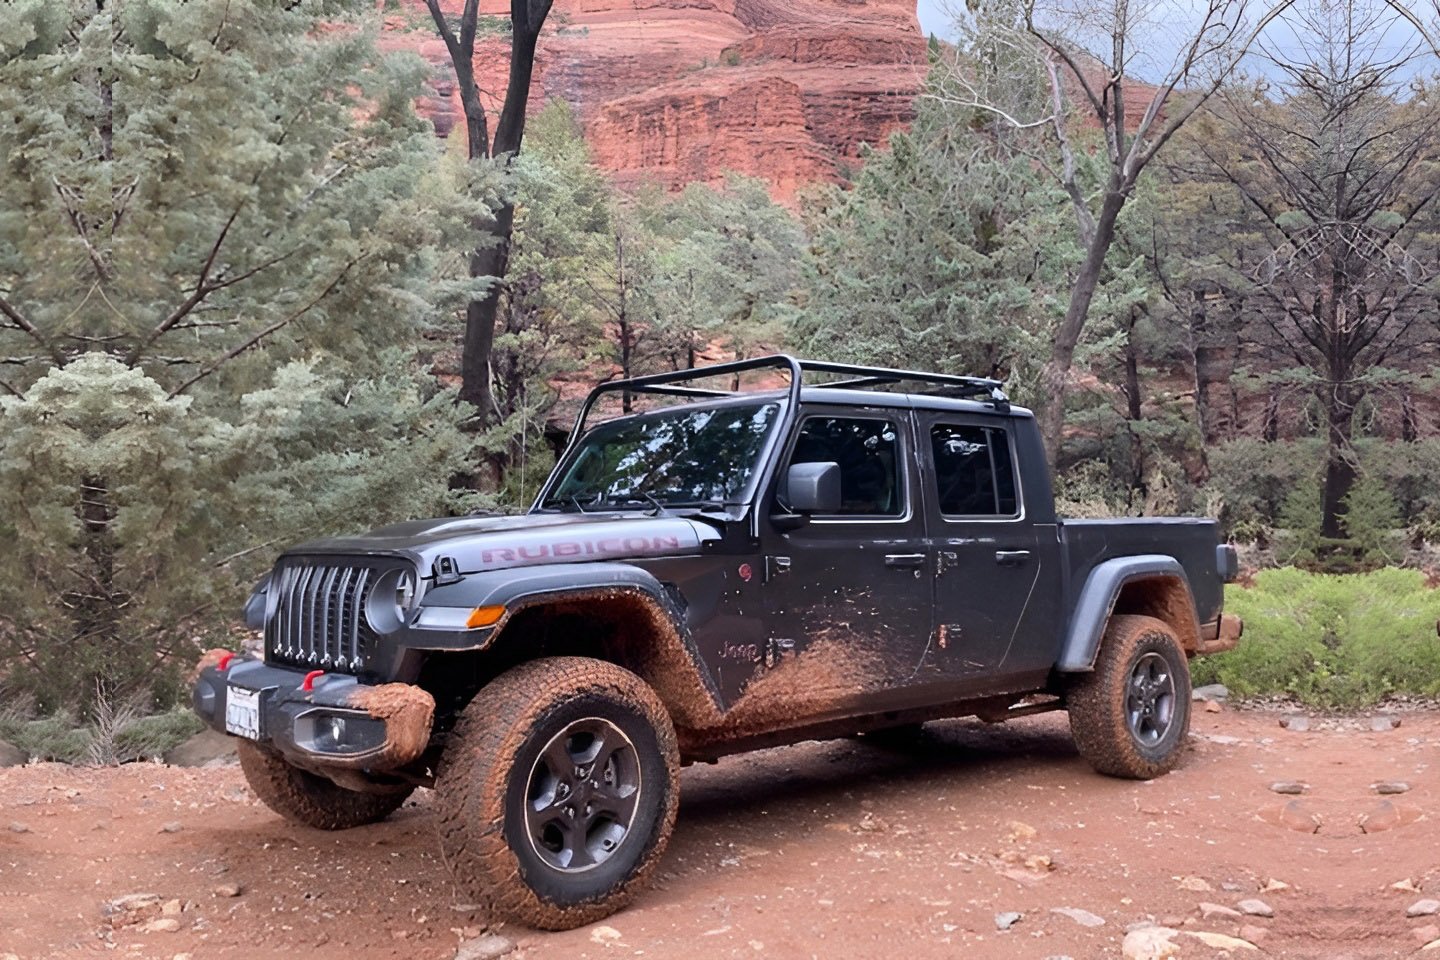 Garvin Can Haul The Gear With These New Jeep Gladiator Racks